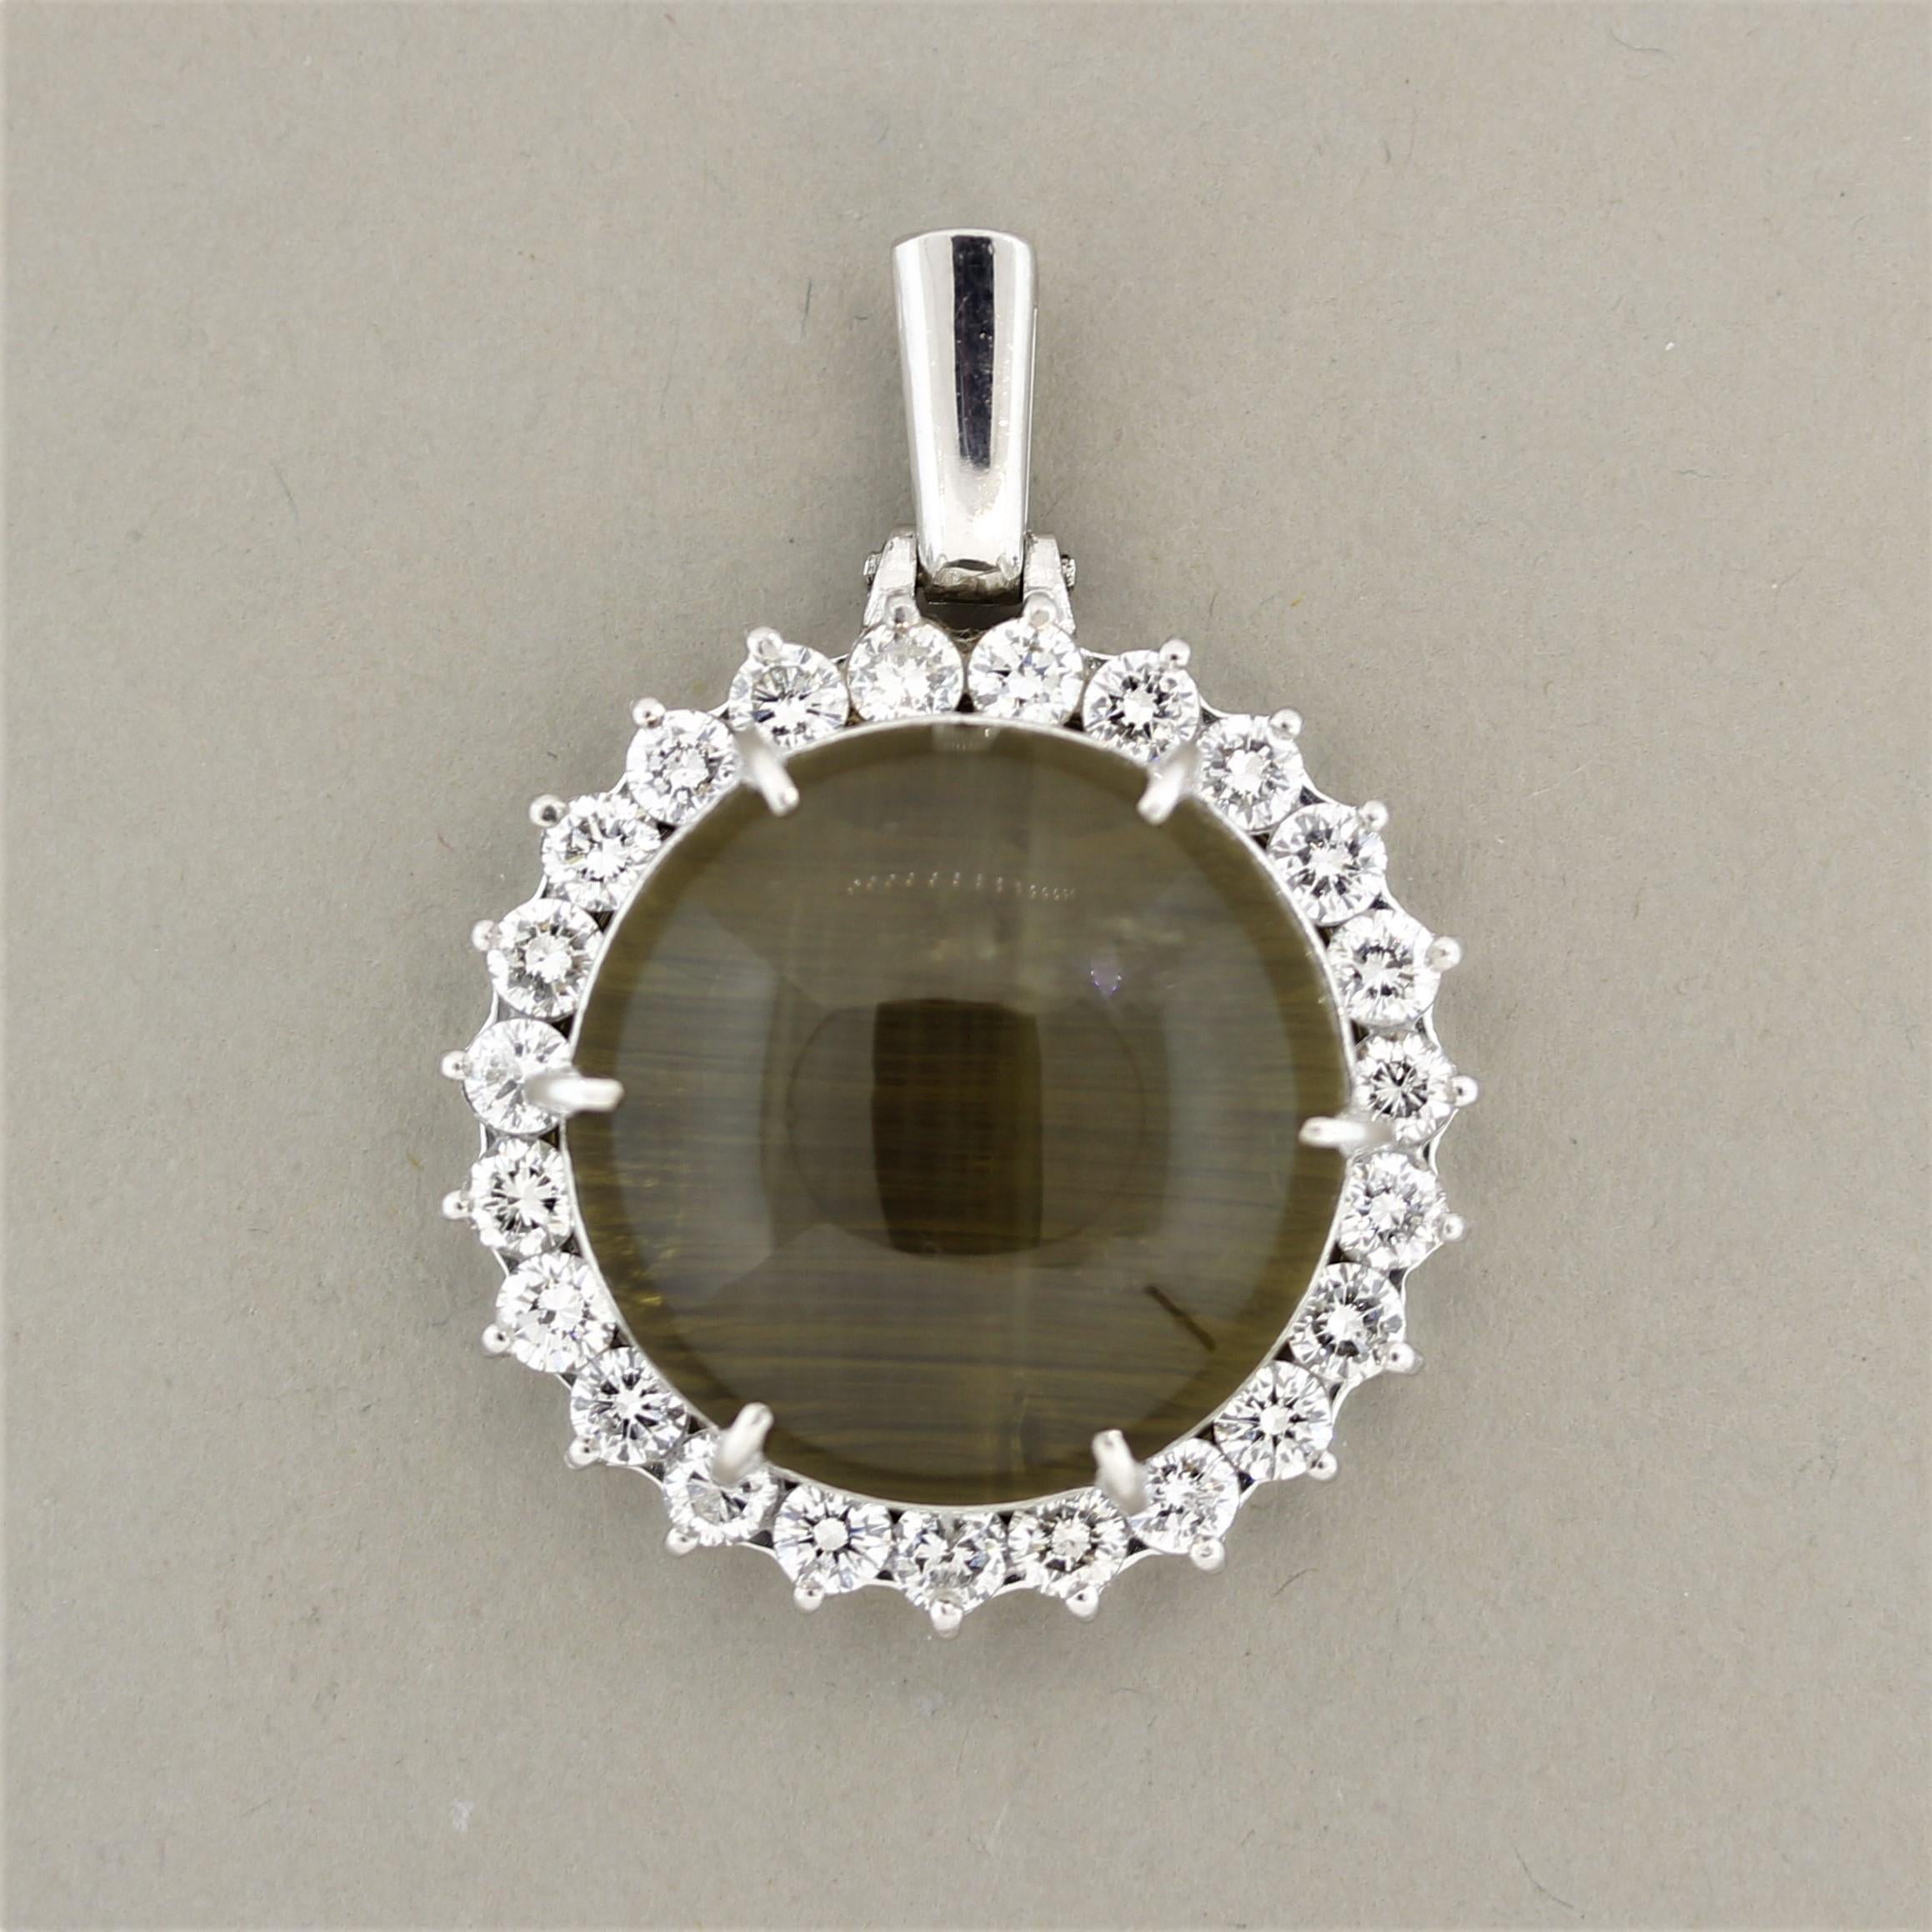 A large impressive and rare natural quartz with a fantastic cat’s eye, known as chatoyancy in the trade. The cat’s eye effect is most seen with chrysoberyl but in more rare occasions other precious stones can also display the unique phenomenon. It